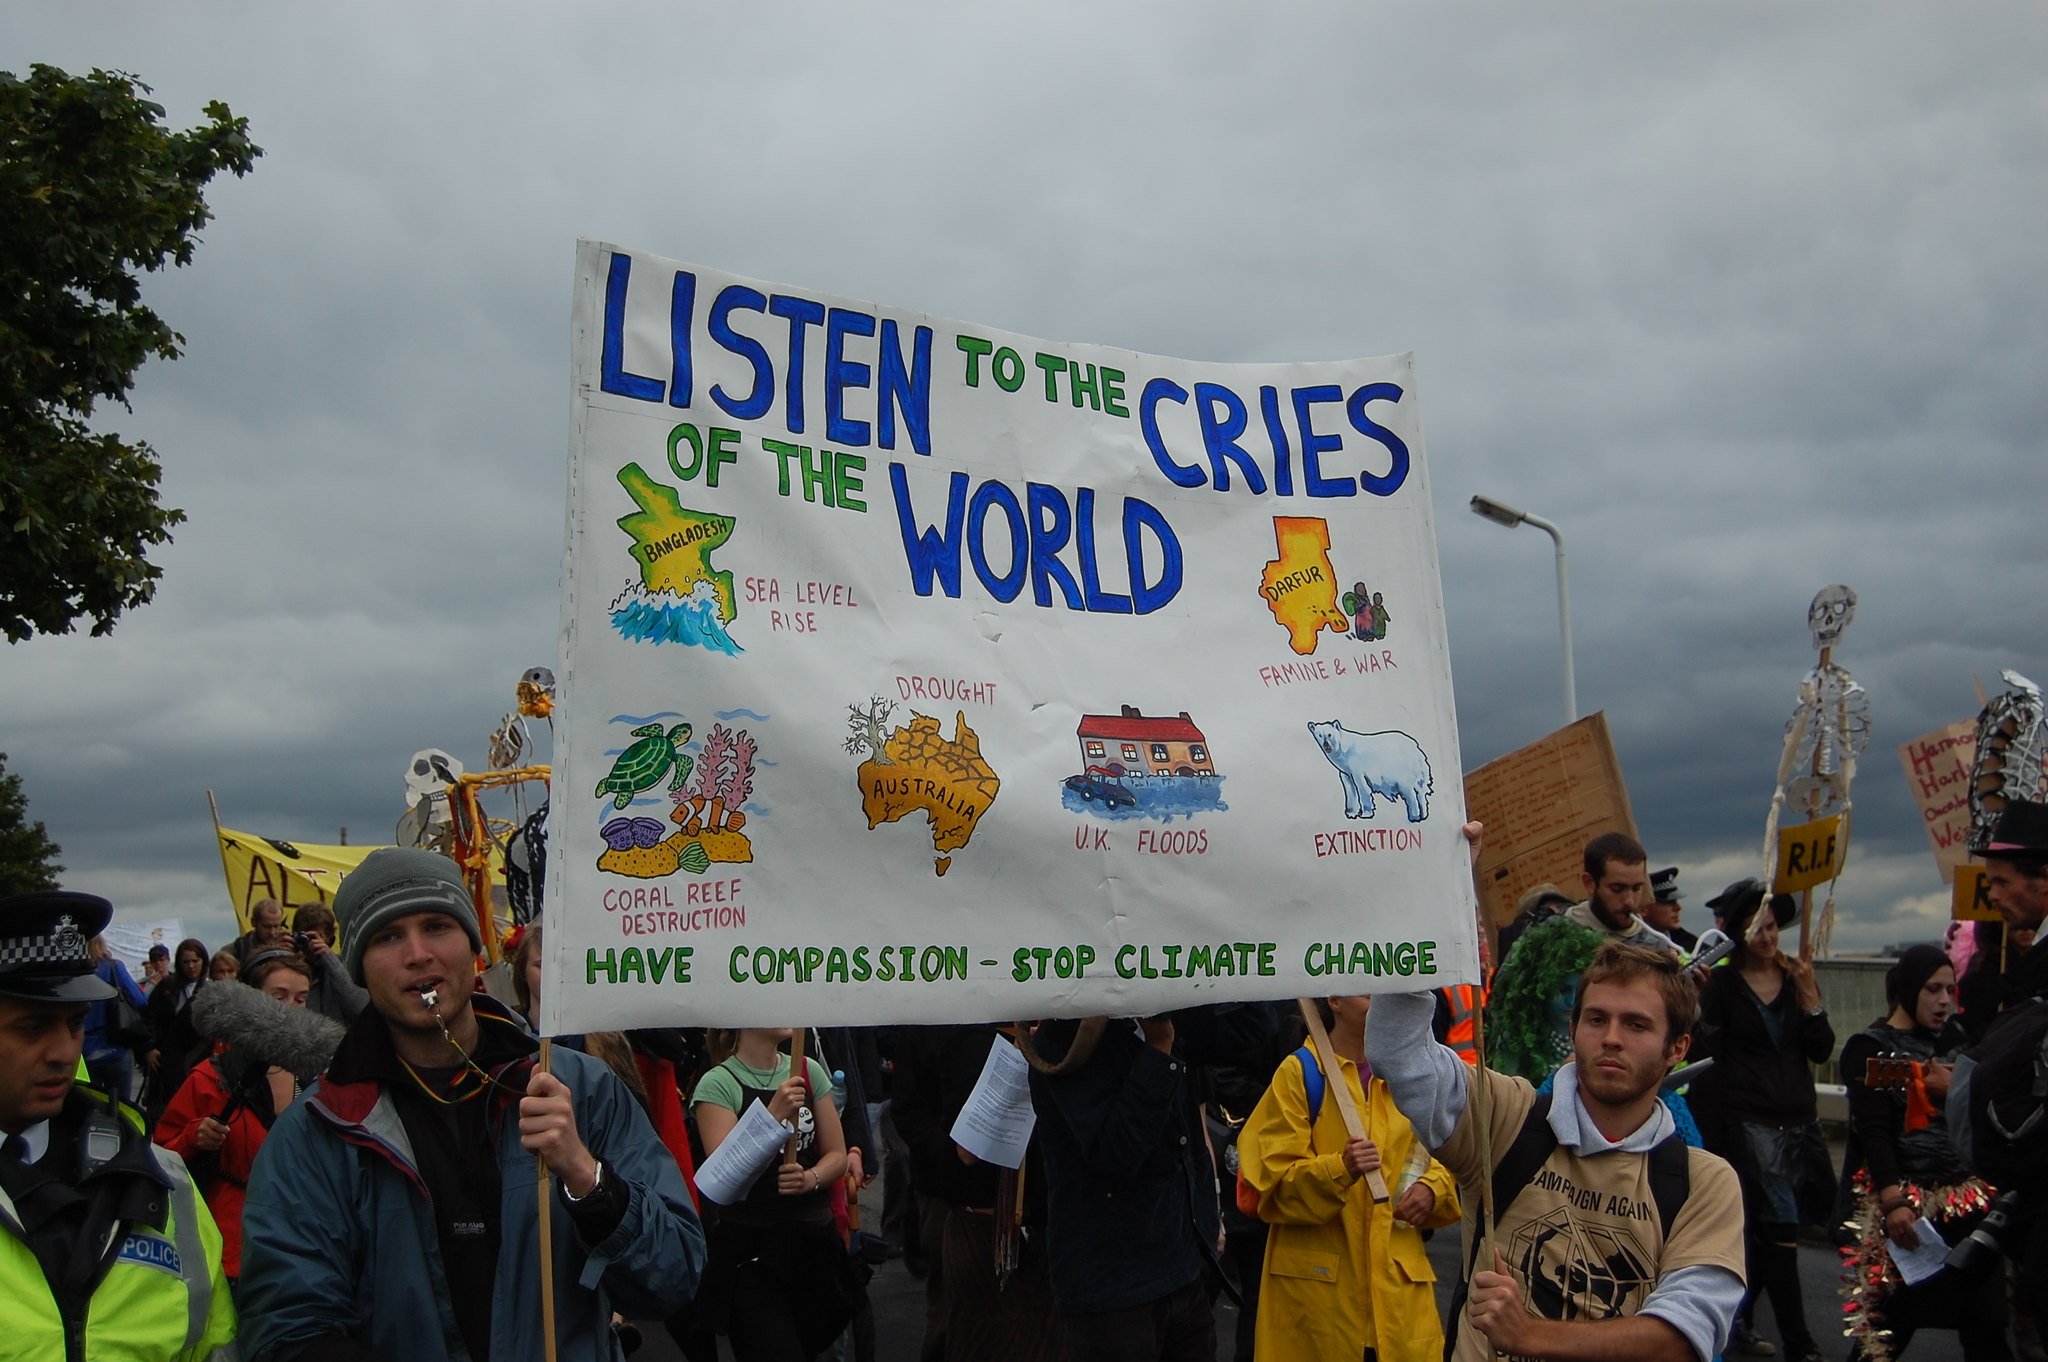 A protest sign from the Climate Change Camp in 2007 at Heathrow Airport in London